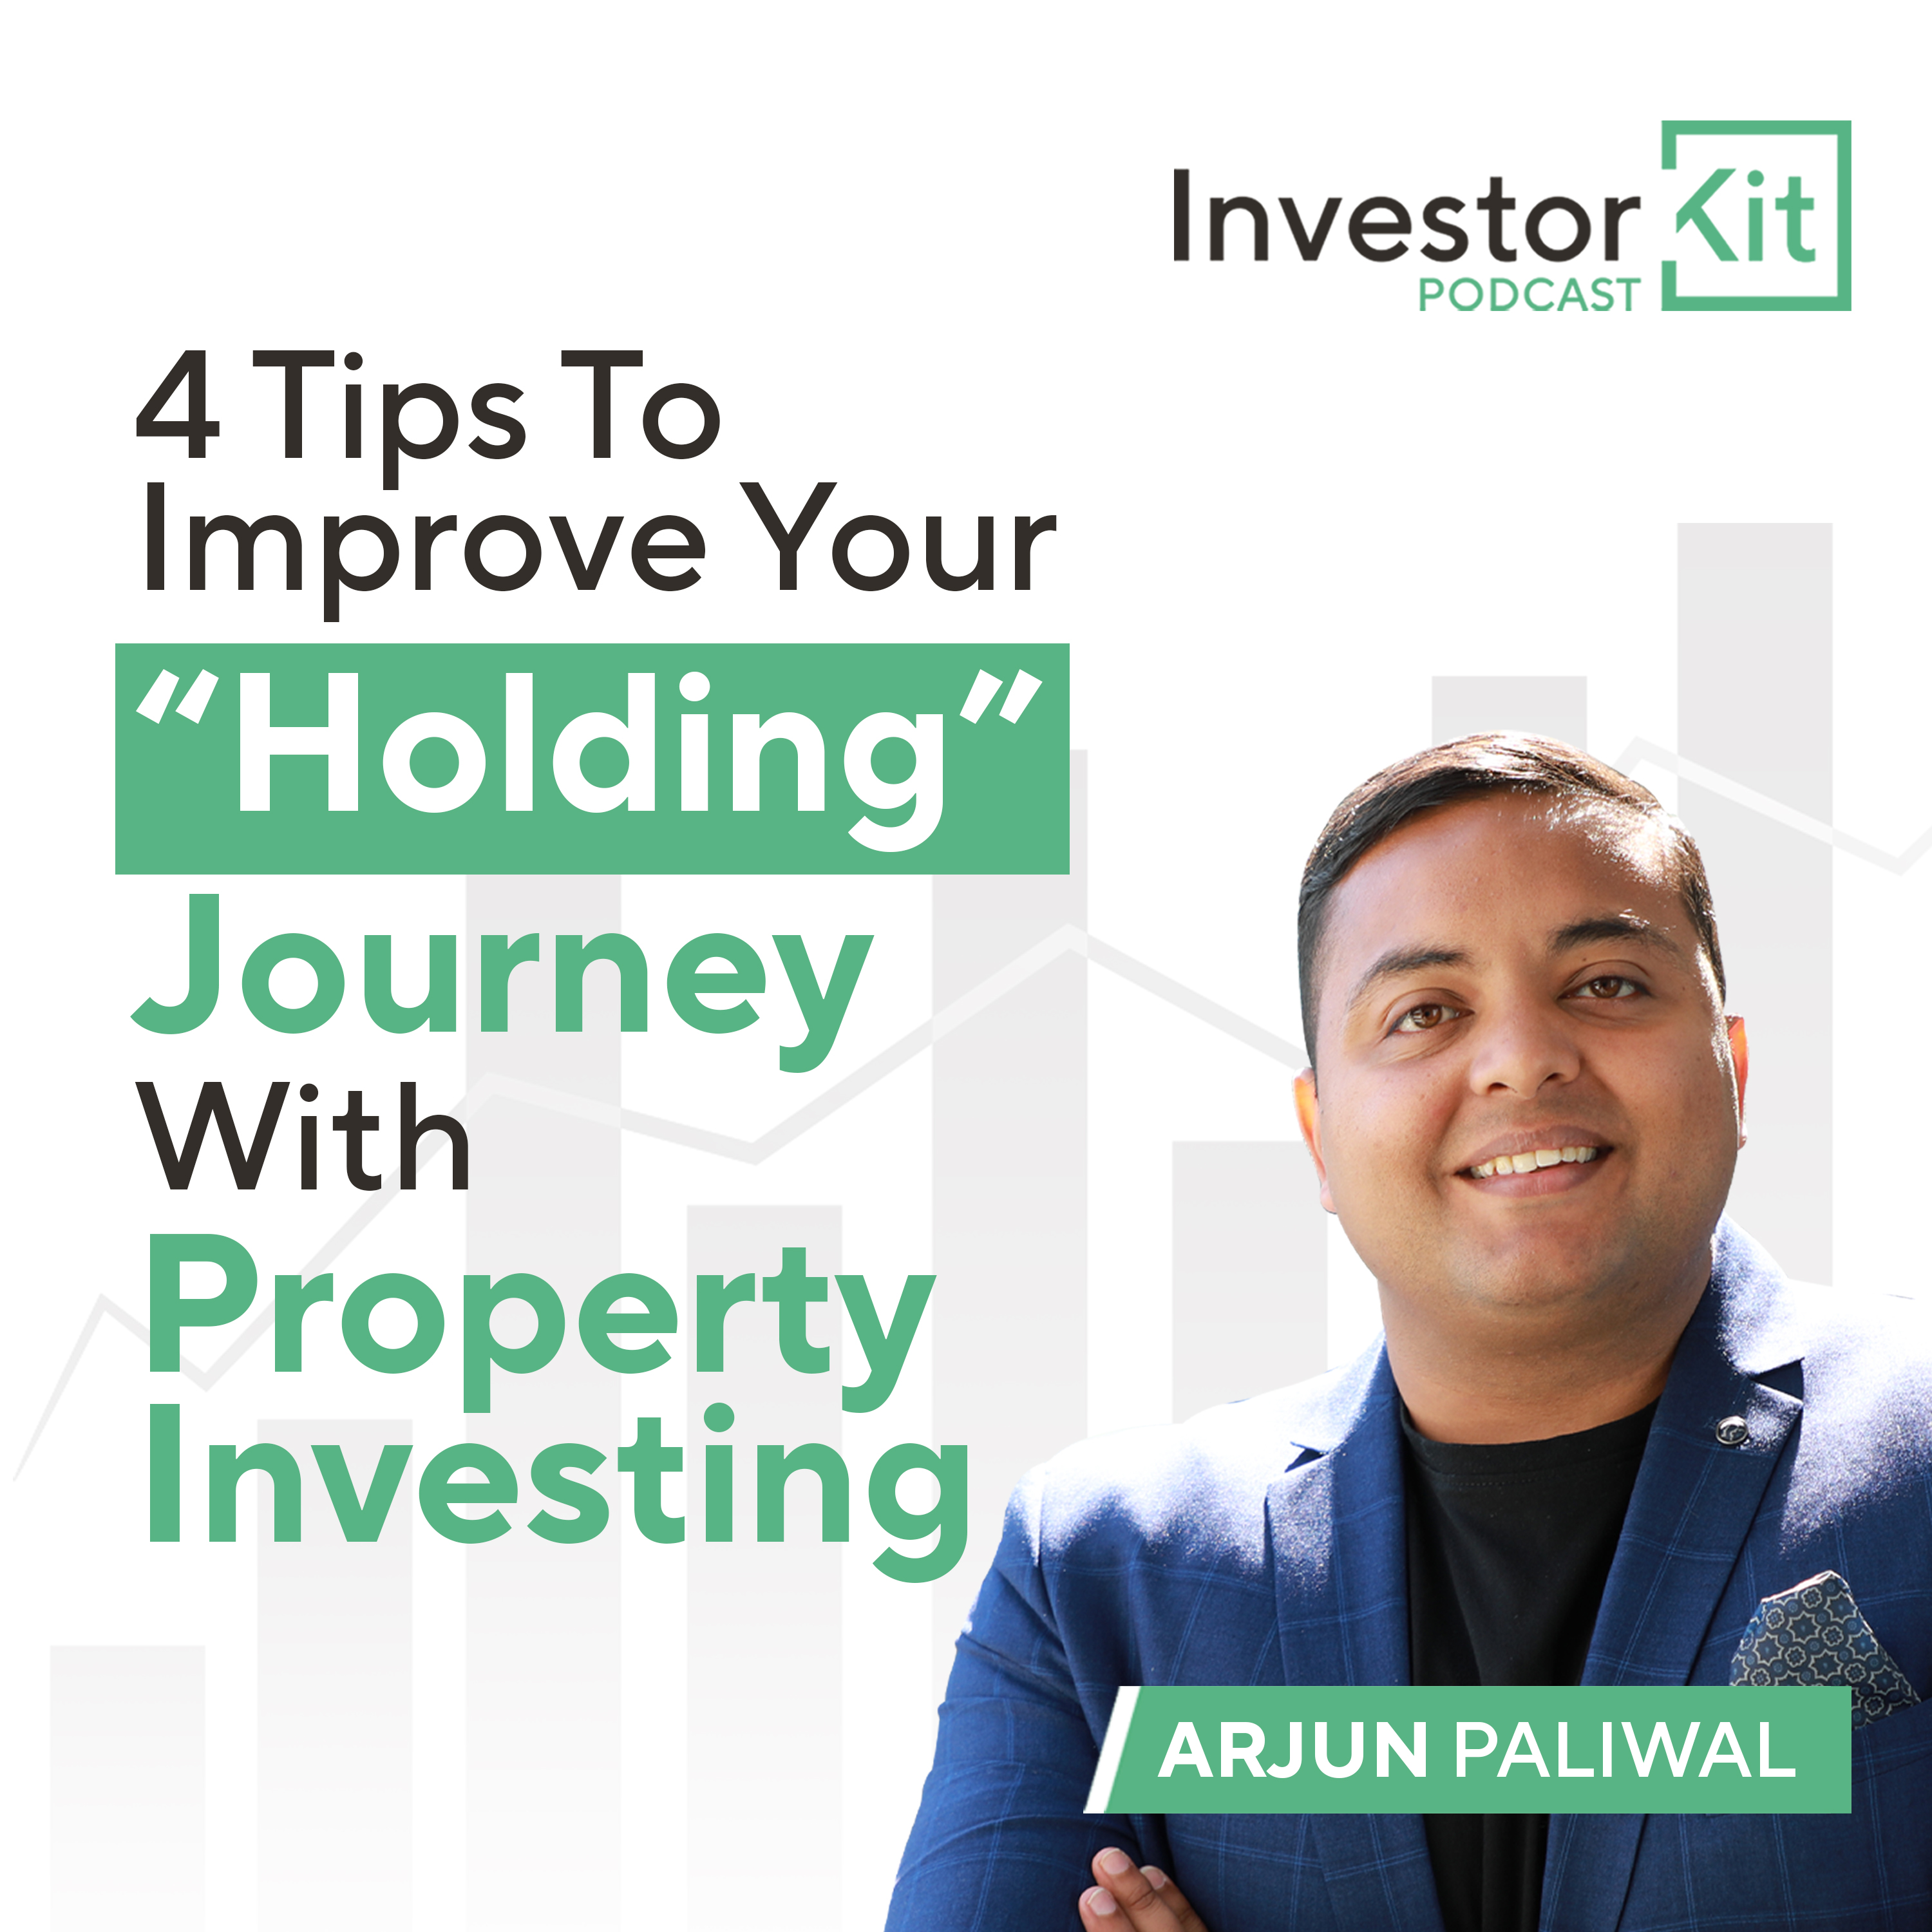 4 Tips To Improve Your "Holding" Journey With Property Investing